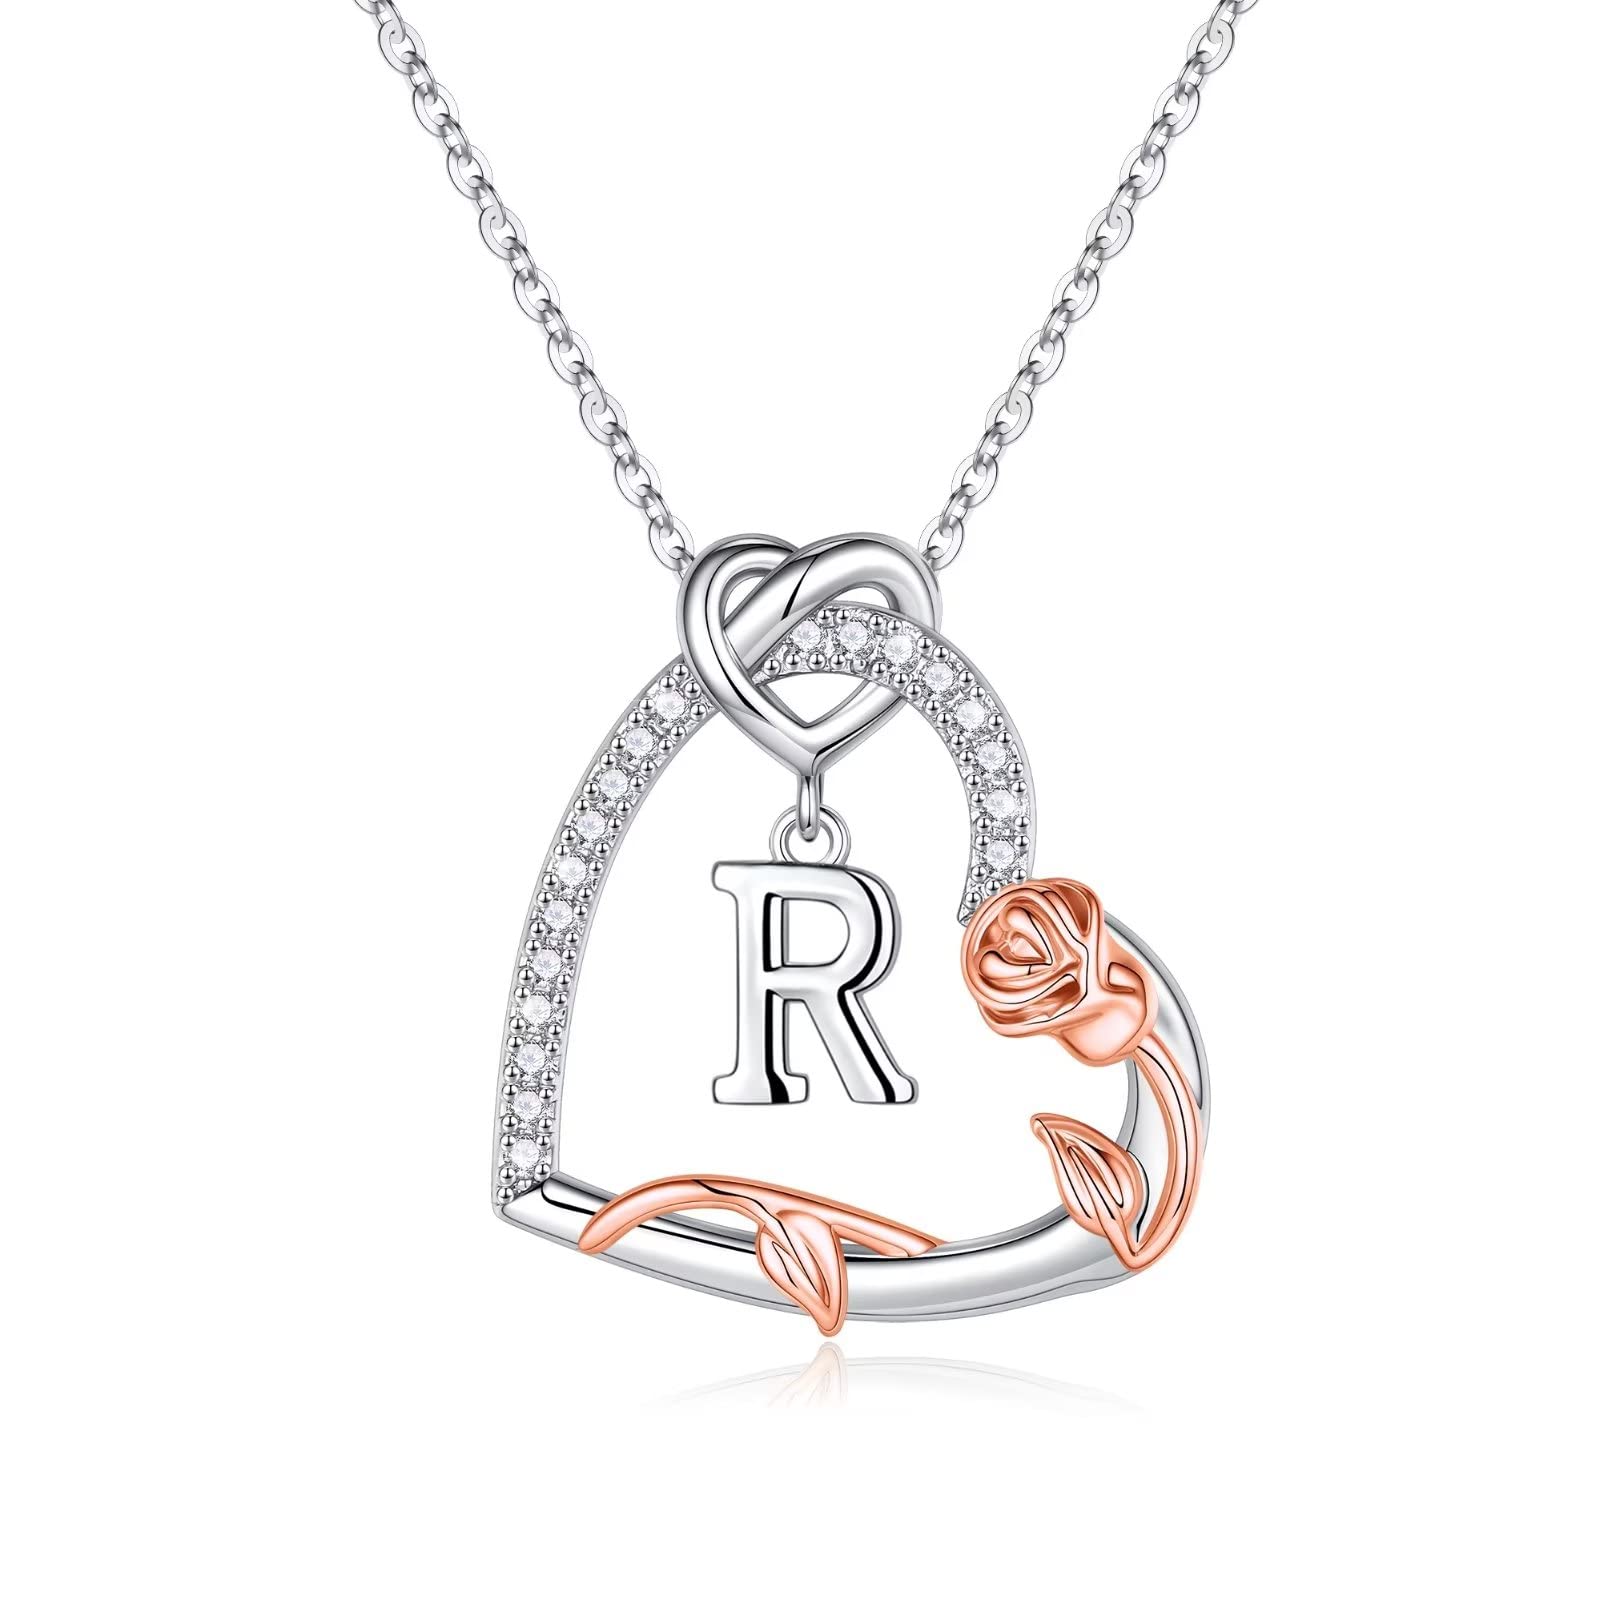 Rose Heart Initial Necklaces Gifts for Women Teen Girls, Love Heart Initial Letter Pendant Necklace Jewelry Mothers Day Valentines Christmas Birthday Gifts for Her Girlfriend Wife Mom Daughter